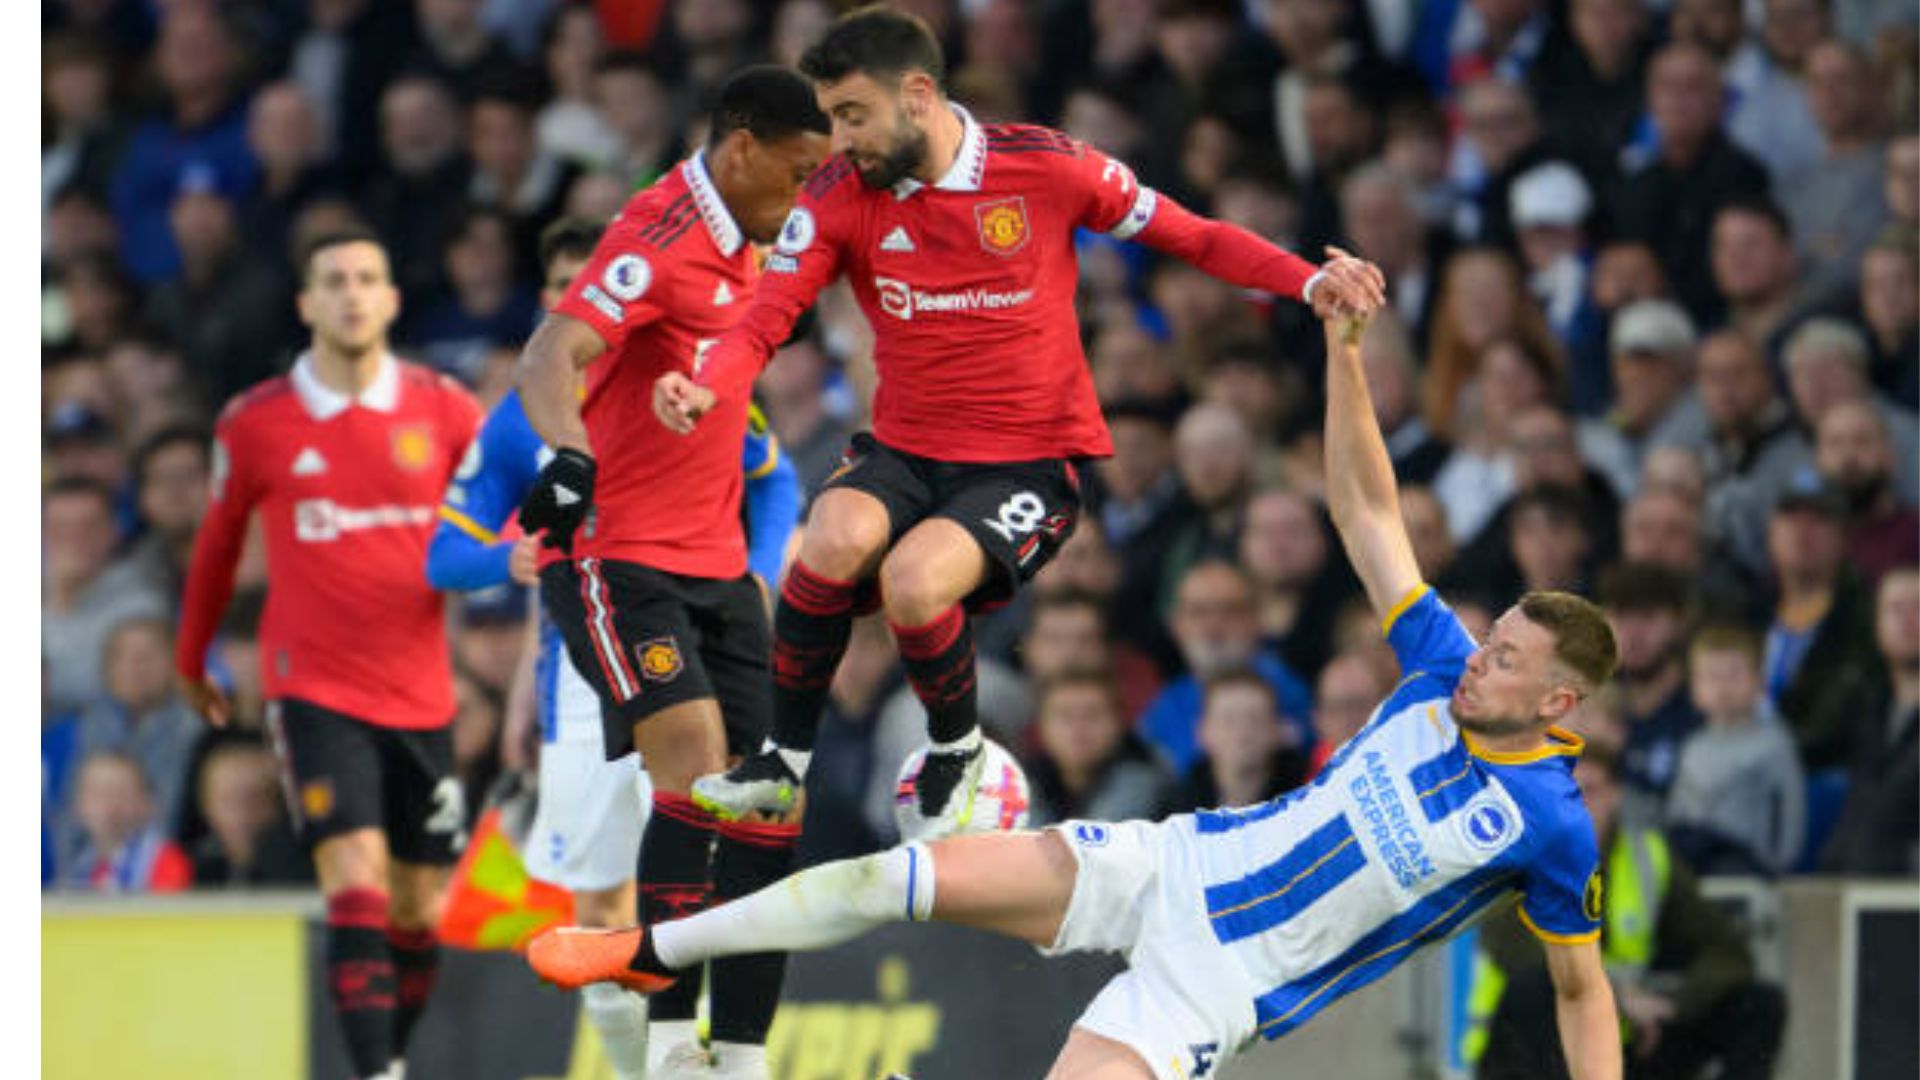 'I know the problem' - A Manchester united star breaks silence on what may be the problem the lead to Brighton defeat